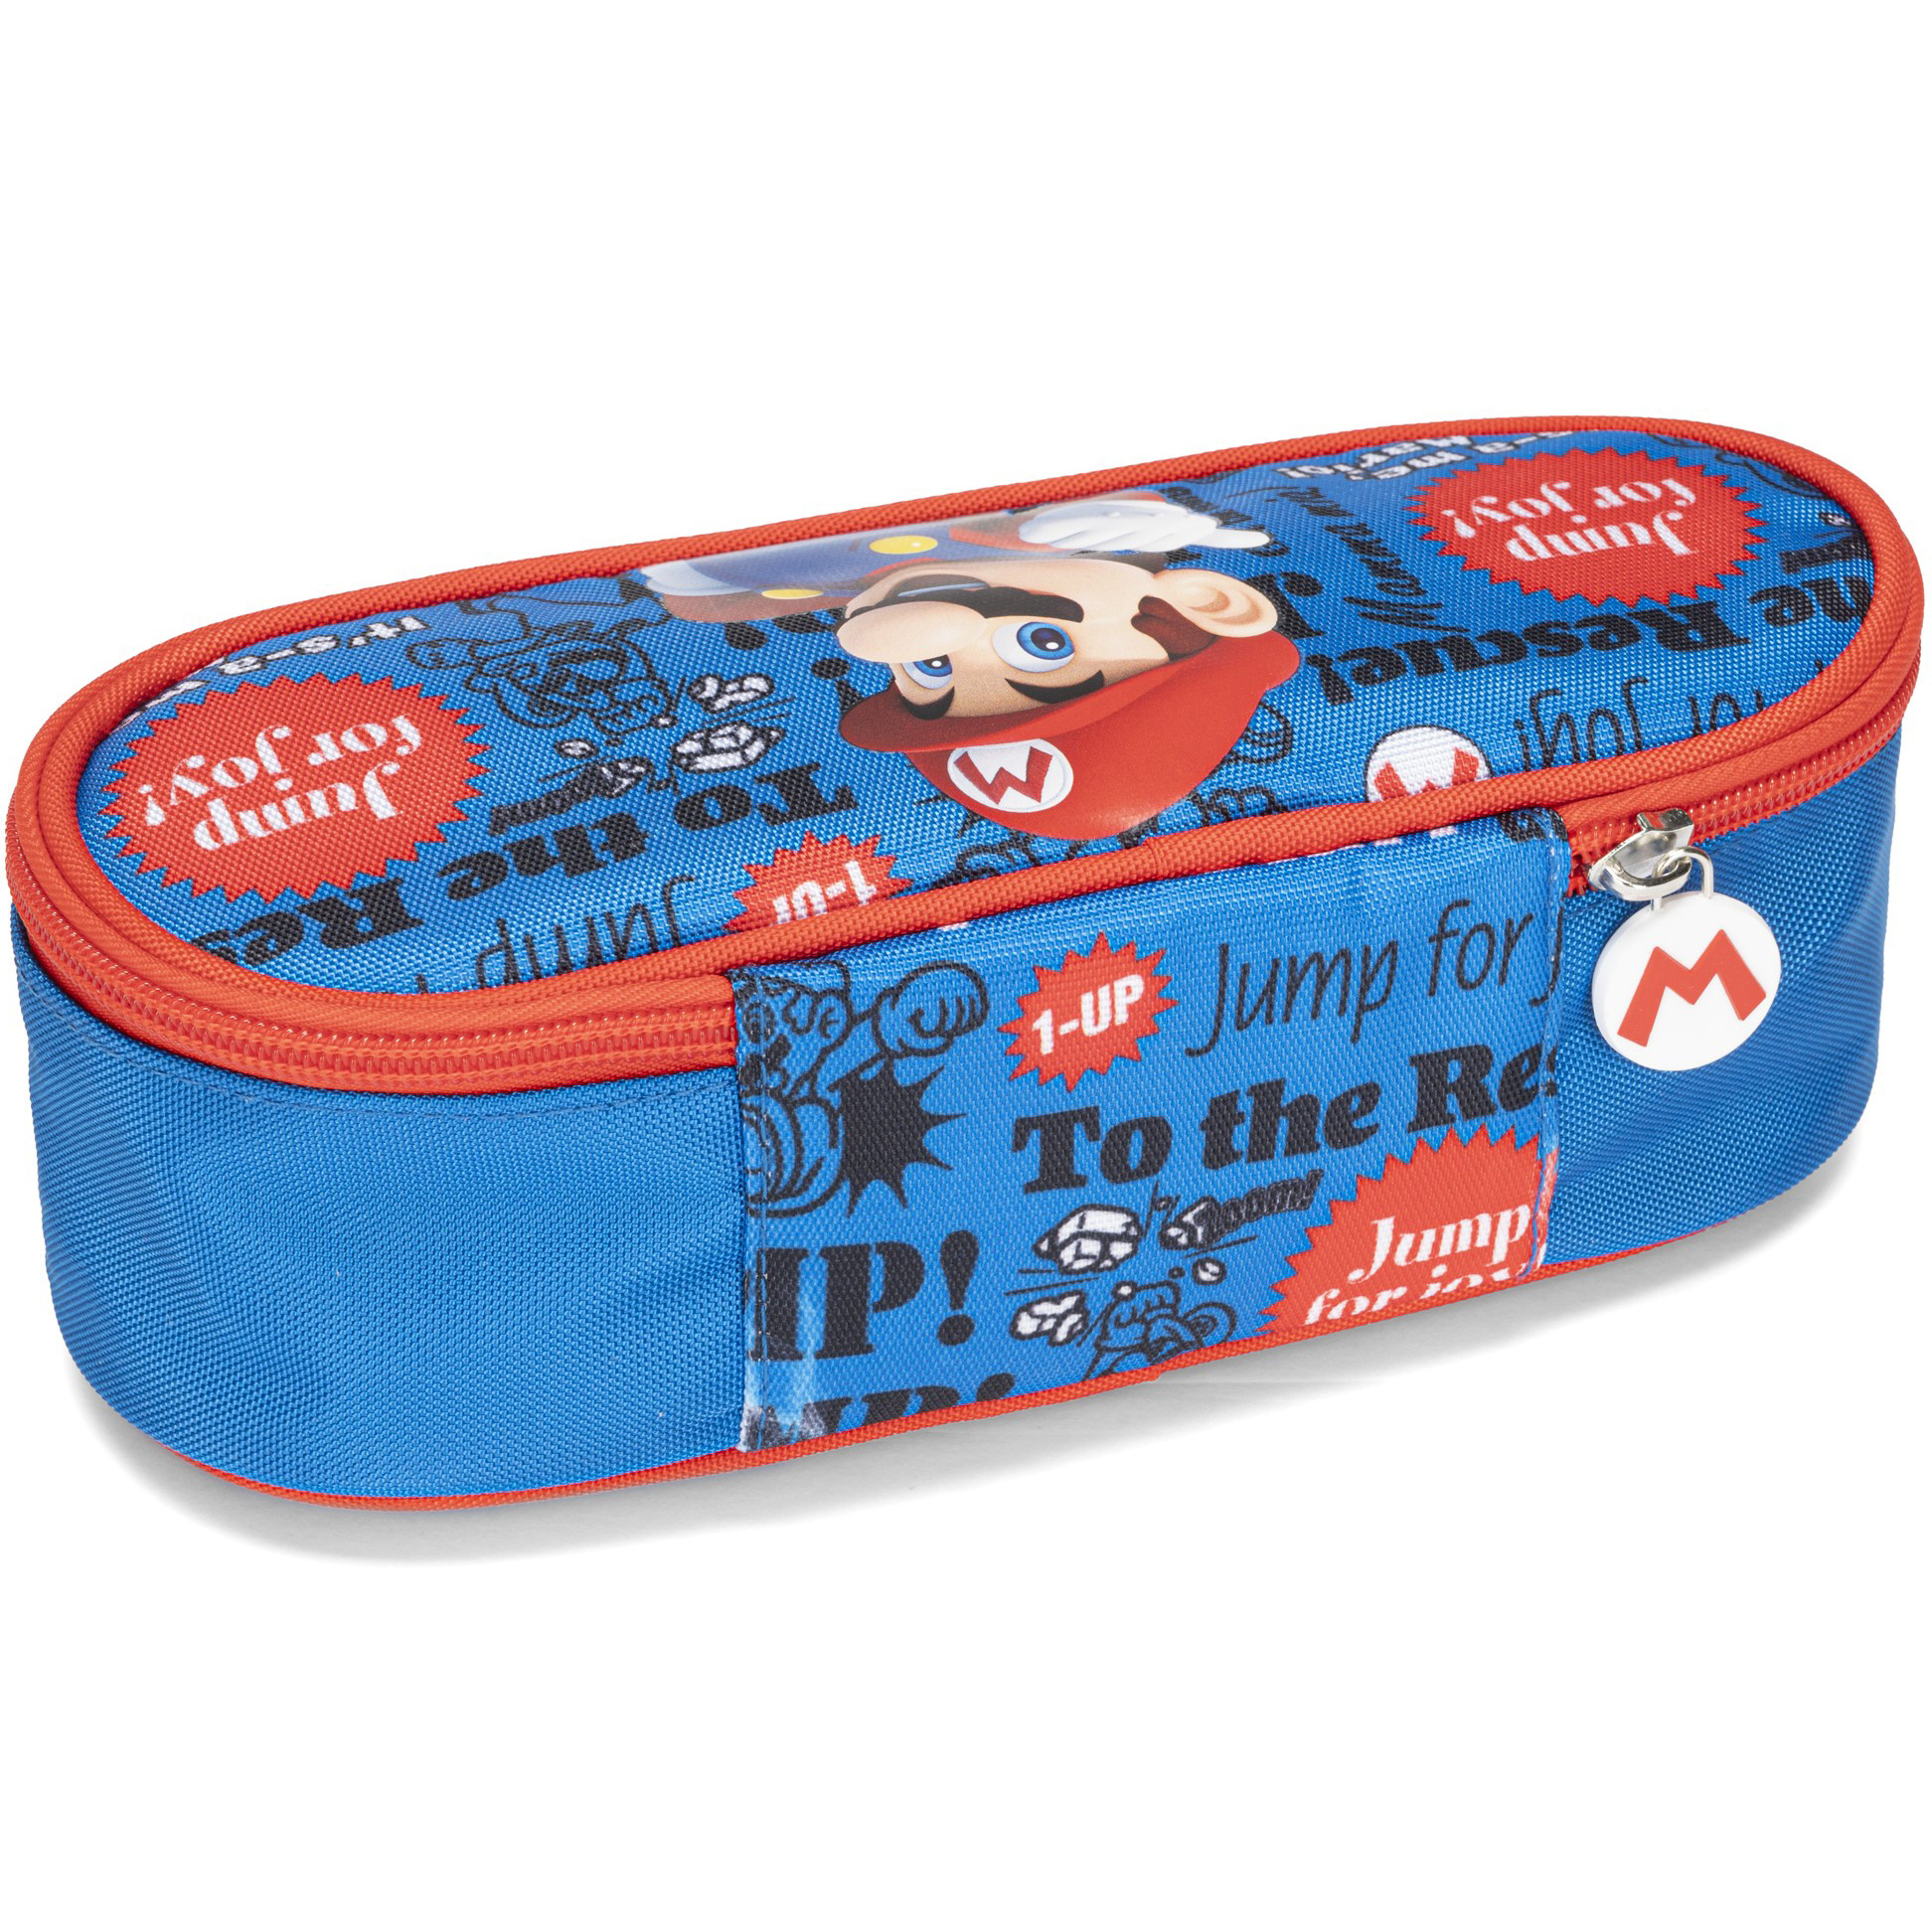 Super Mario Pouch, Jump for Joy - 23 x 6 x 9.5 cm - Polyester